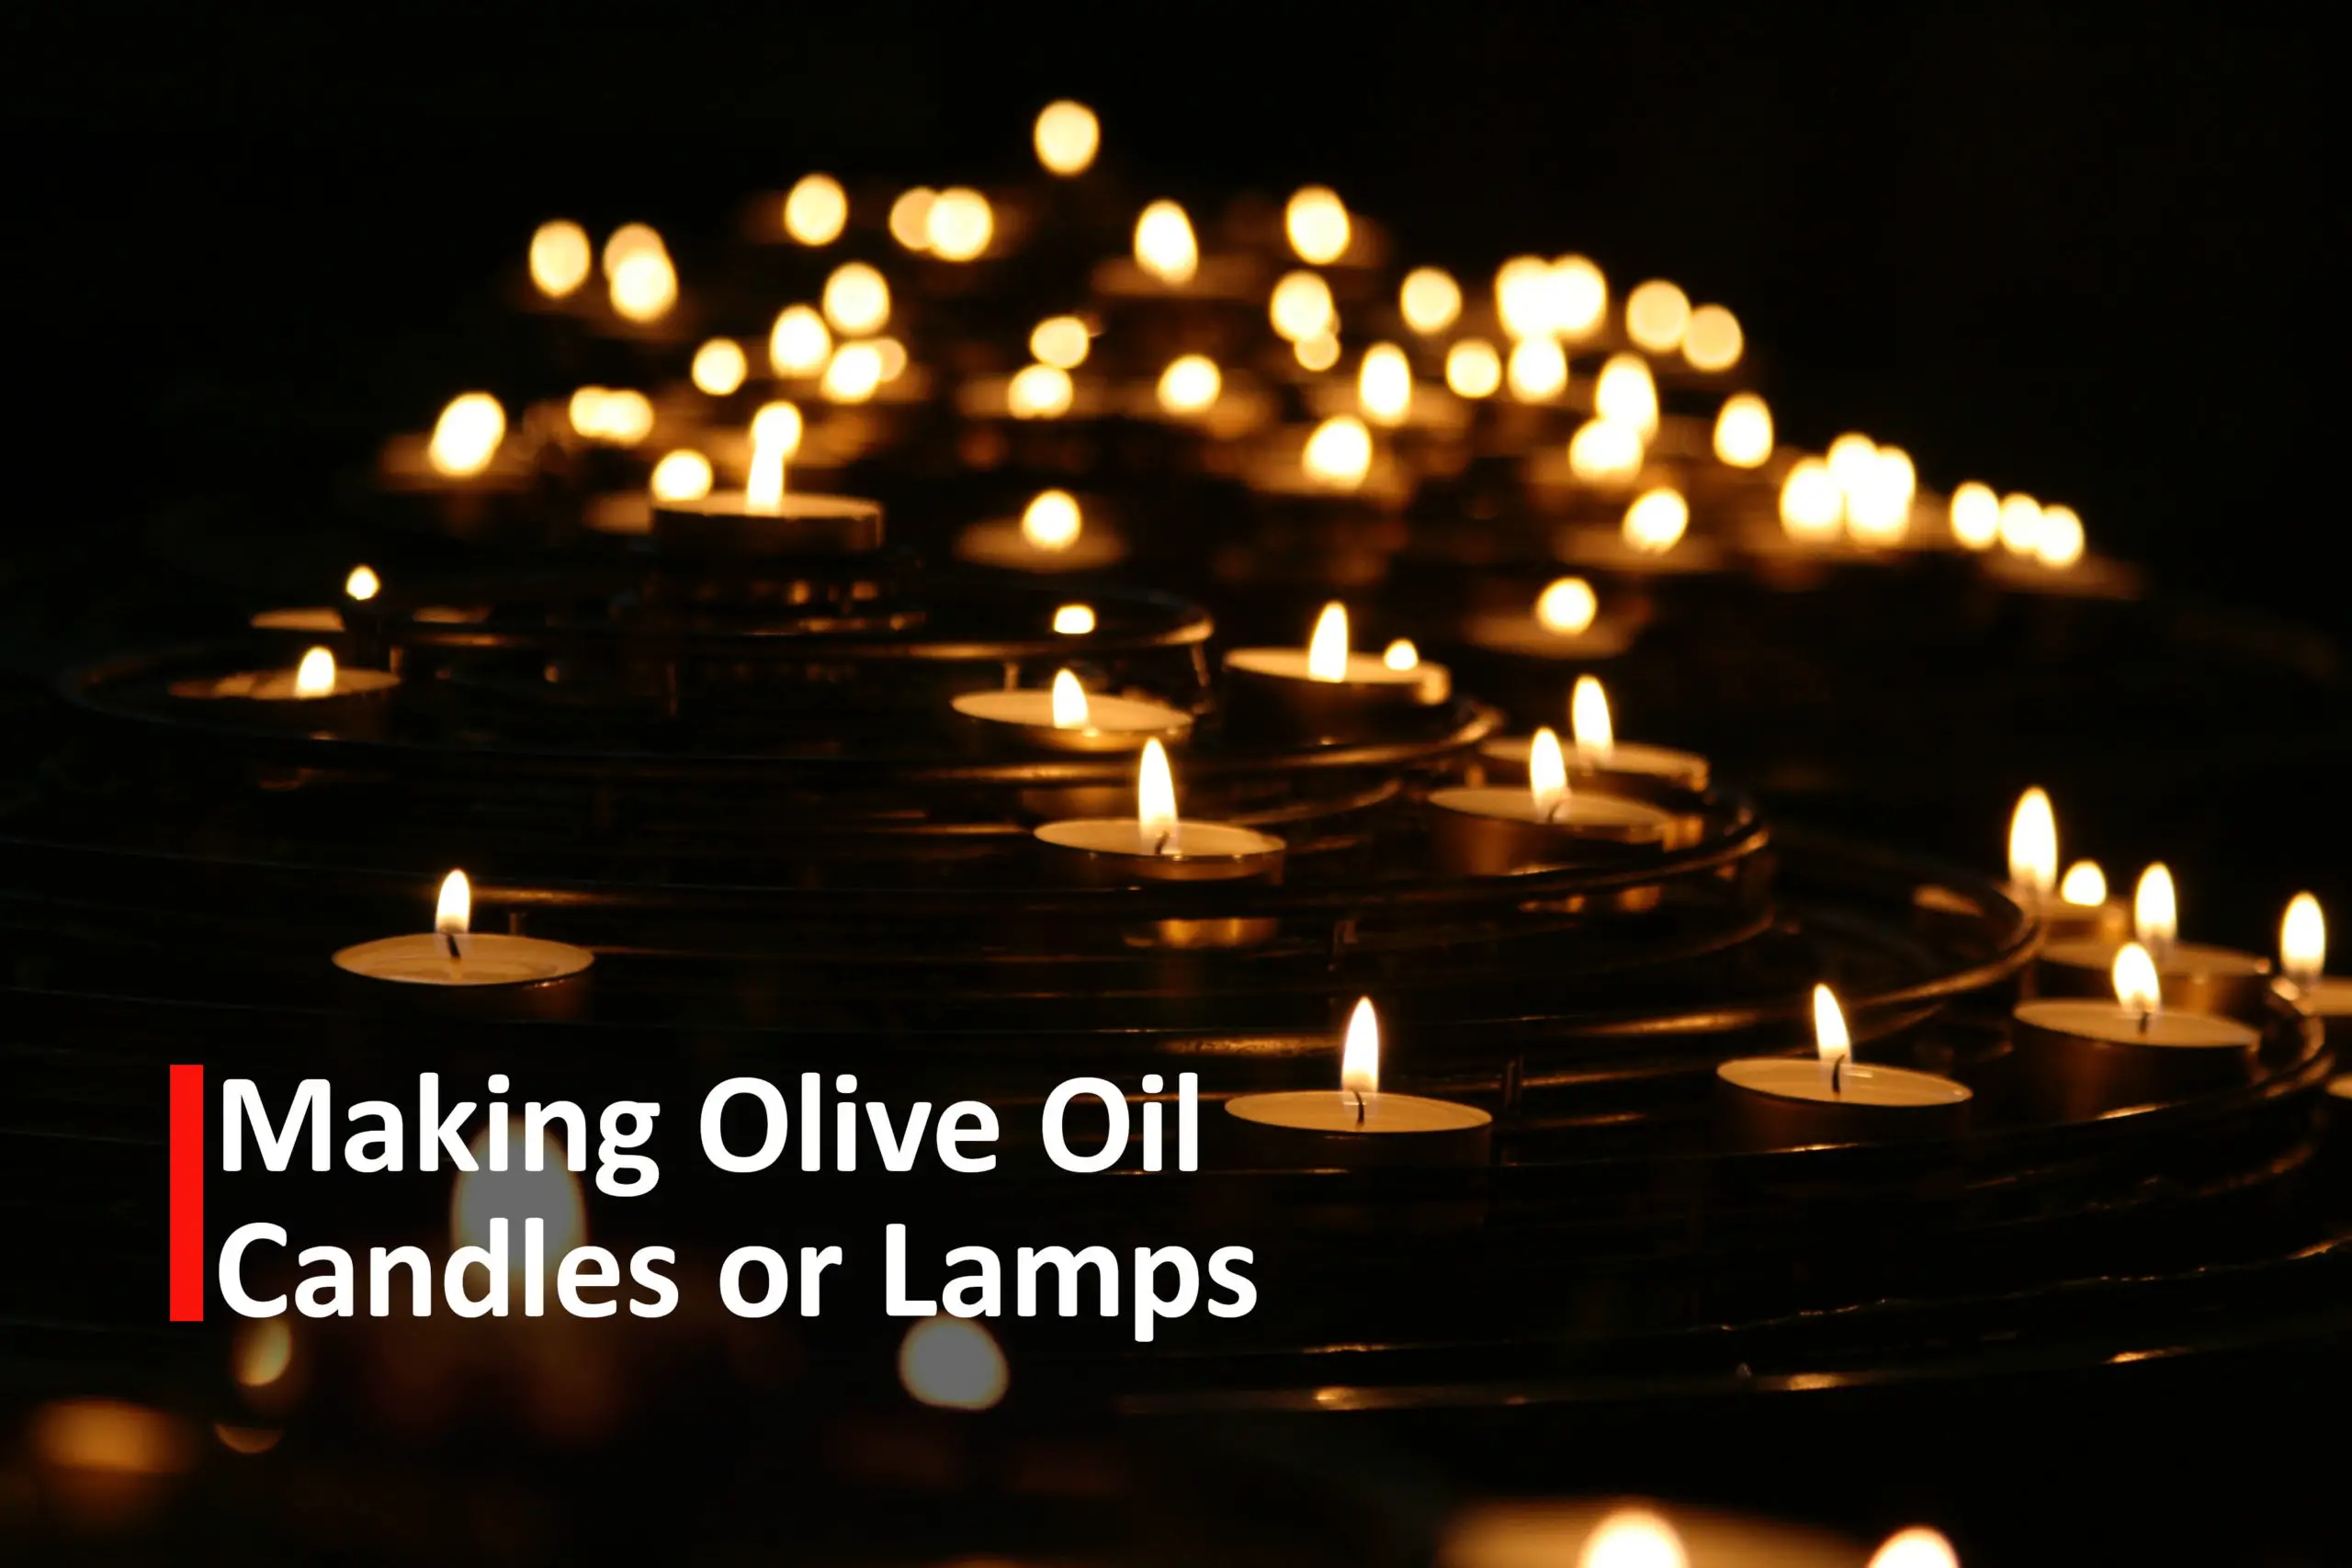 Making Candles or Lamps with Olive Oil